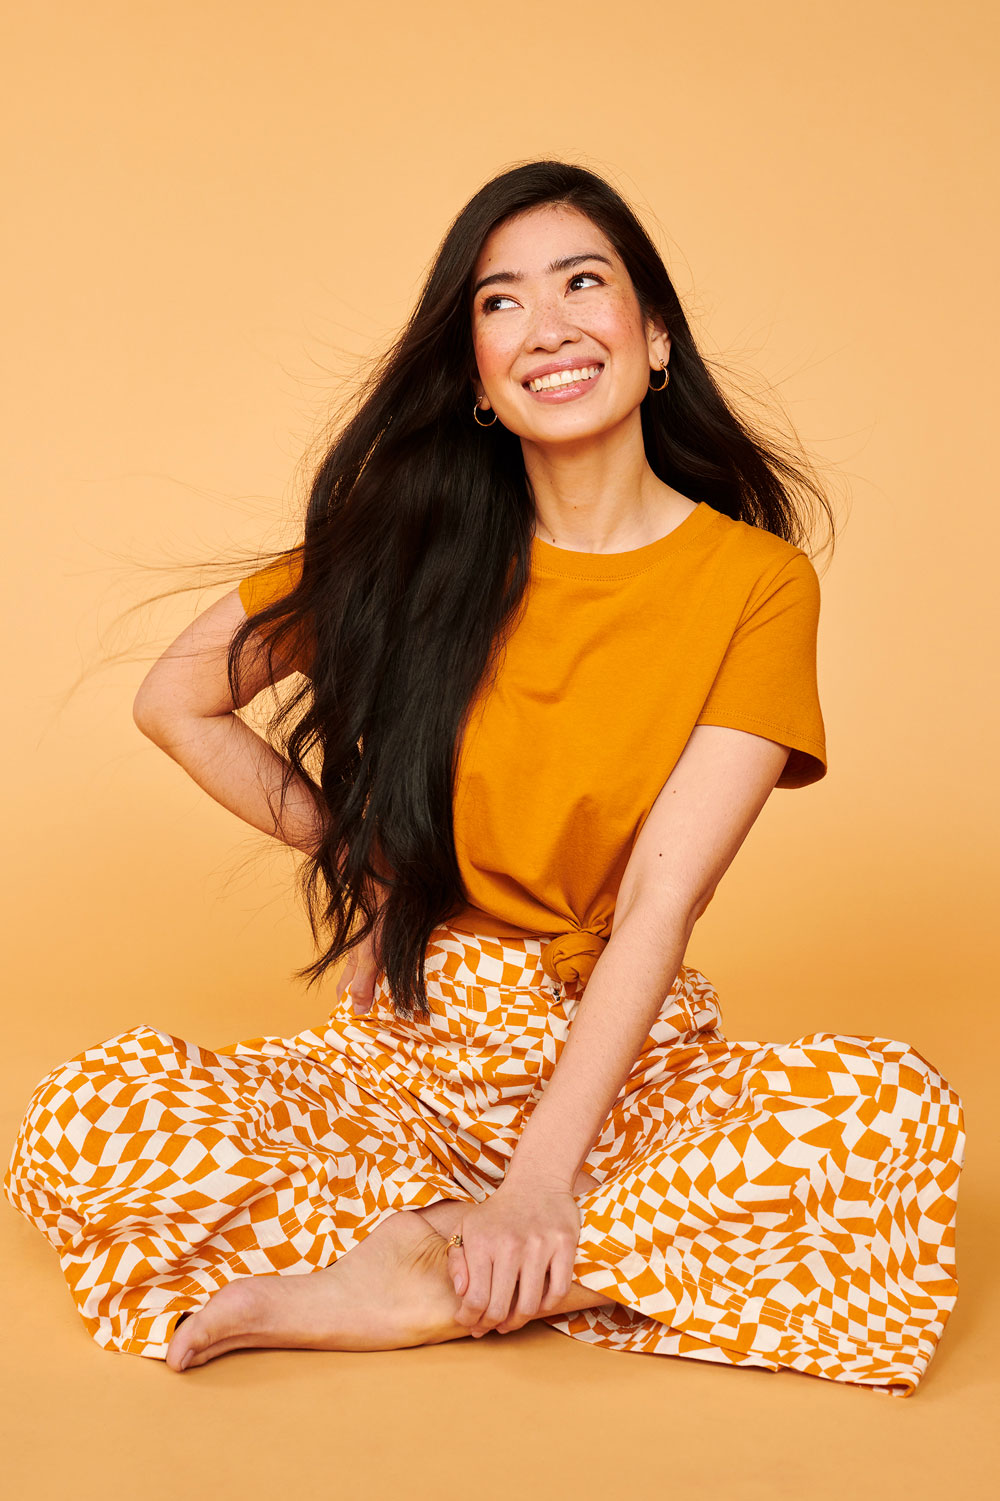 Barefoot female model styled in playfully patterned orange and white pants with matching orange tee